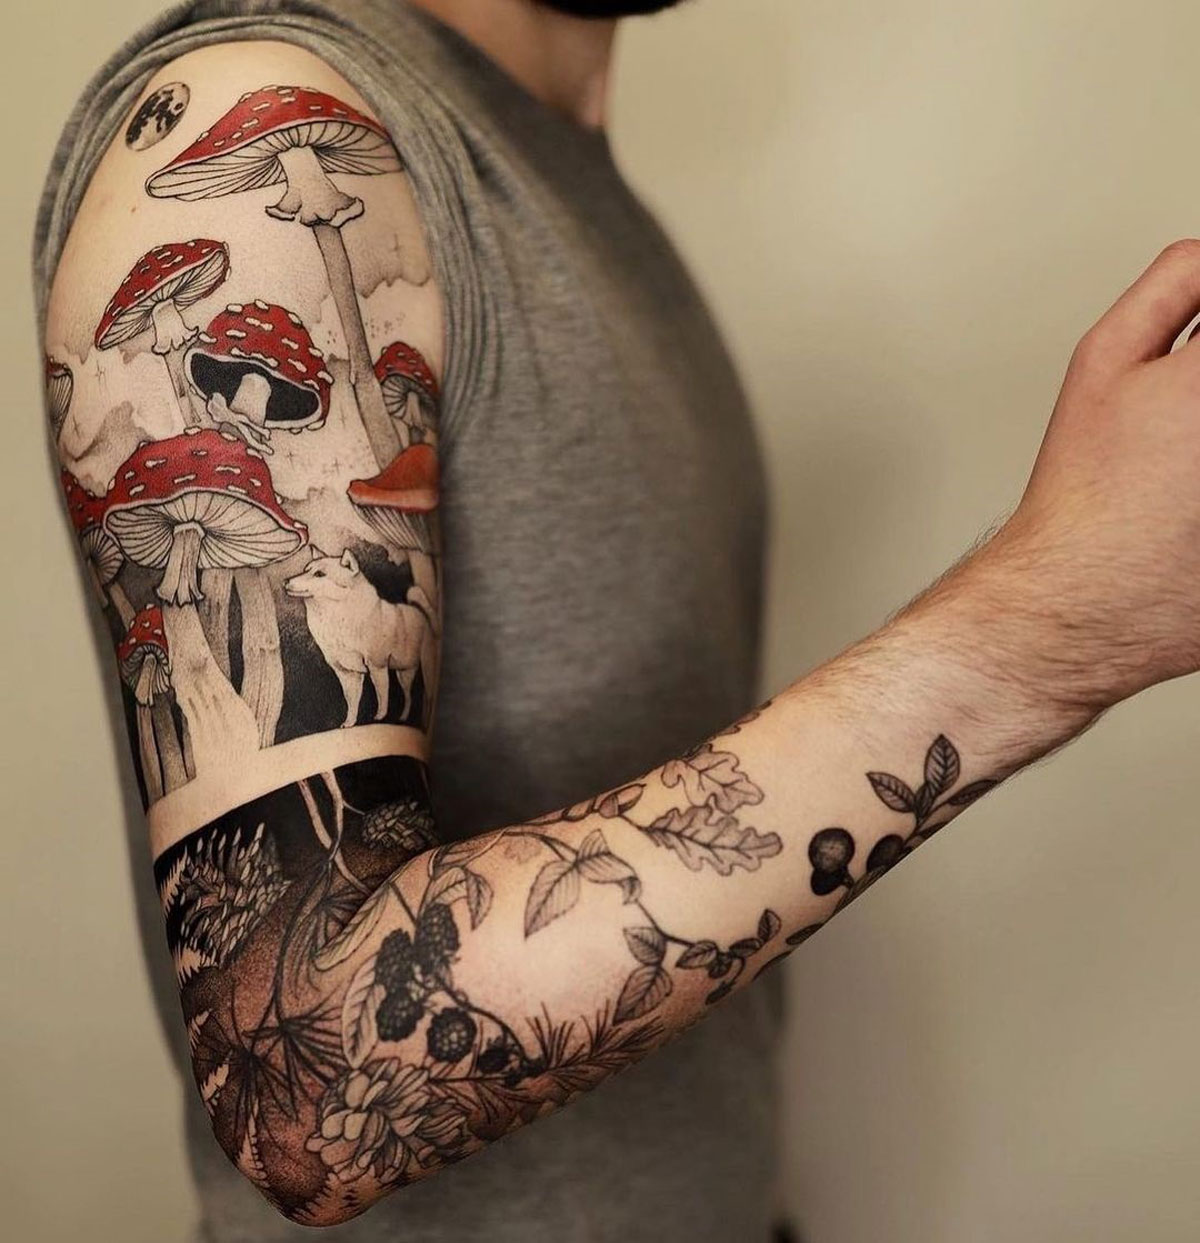 14 Coolest Ideas on Sleeve Tattoos for Men